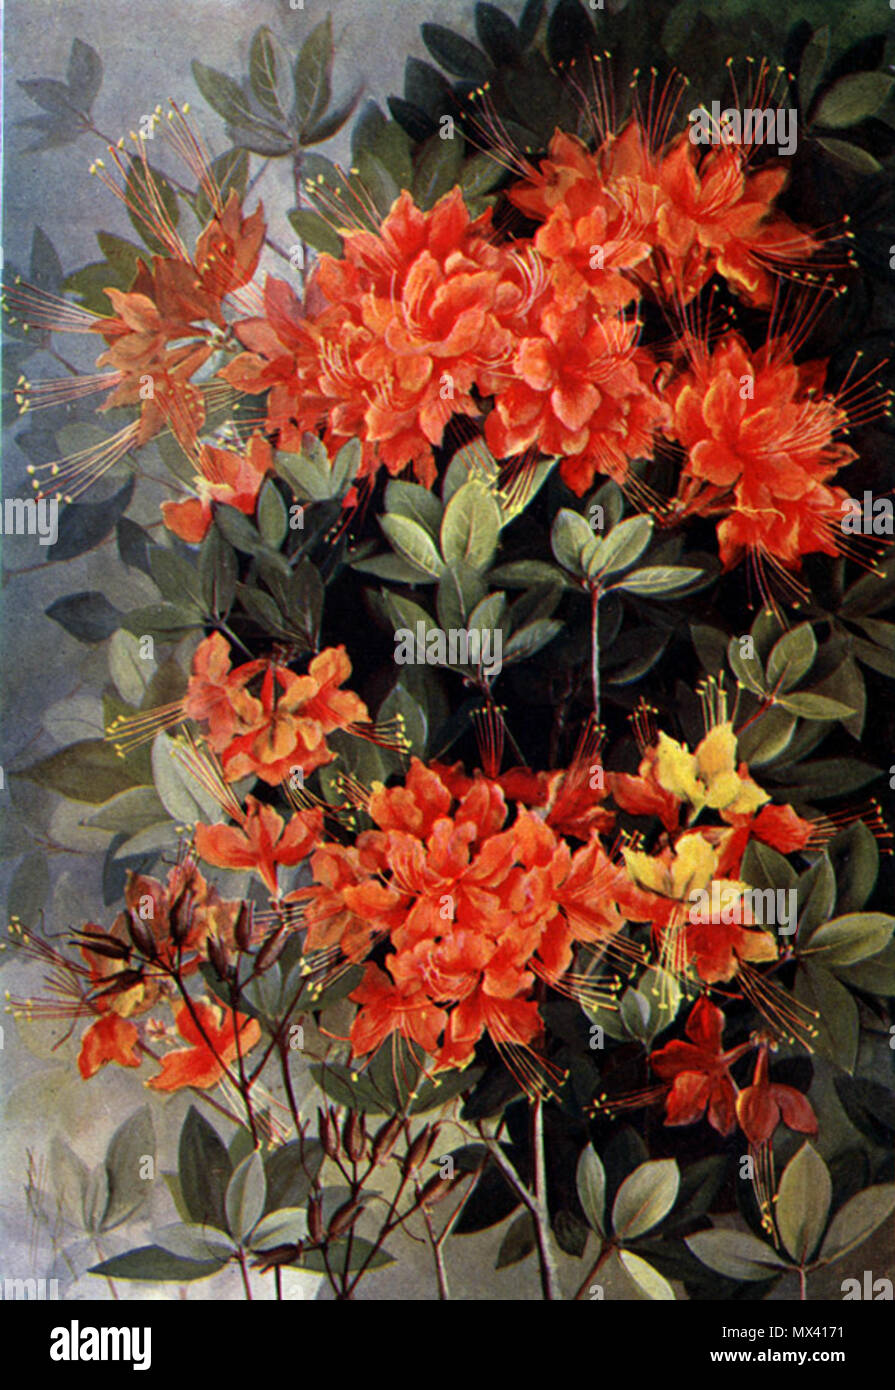 . Flame Azalea, Rhododendron calendulaceum offset color reproduction of painting . 1901. Alice Lounsberry (author, 1872-1949), Ellis Rowan (artist, 1847 - 1922), see English Wikipedia article 520 Rhododendron calendulaceumCDP119A Stock Photo